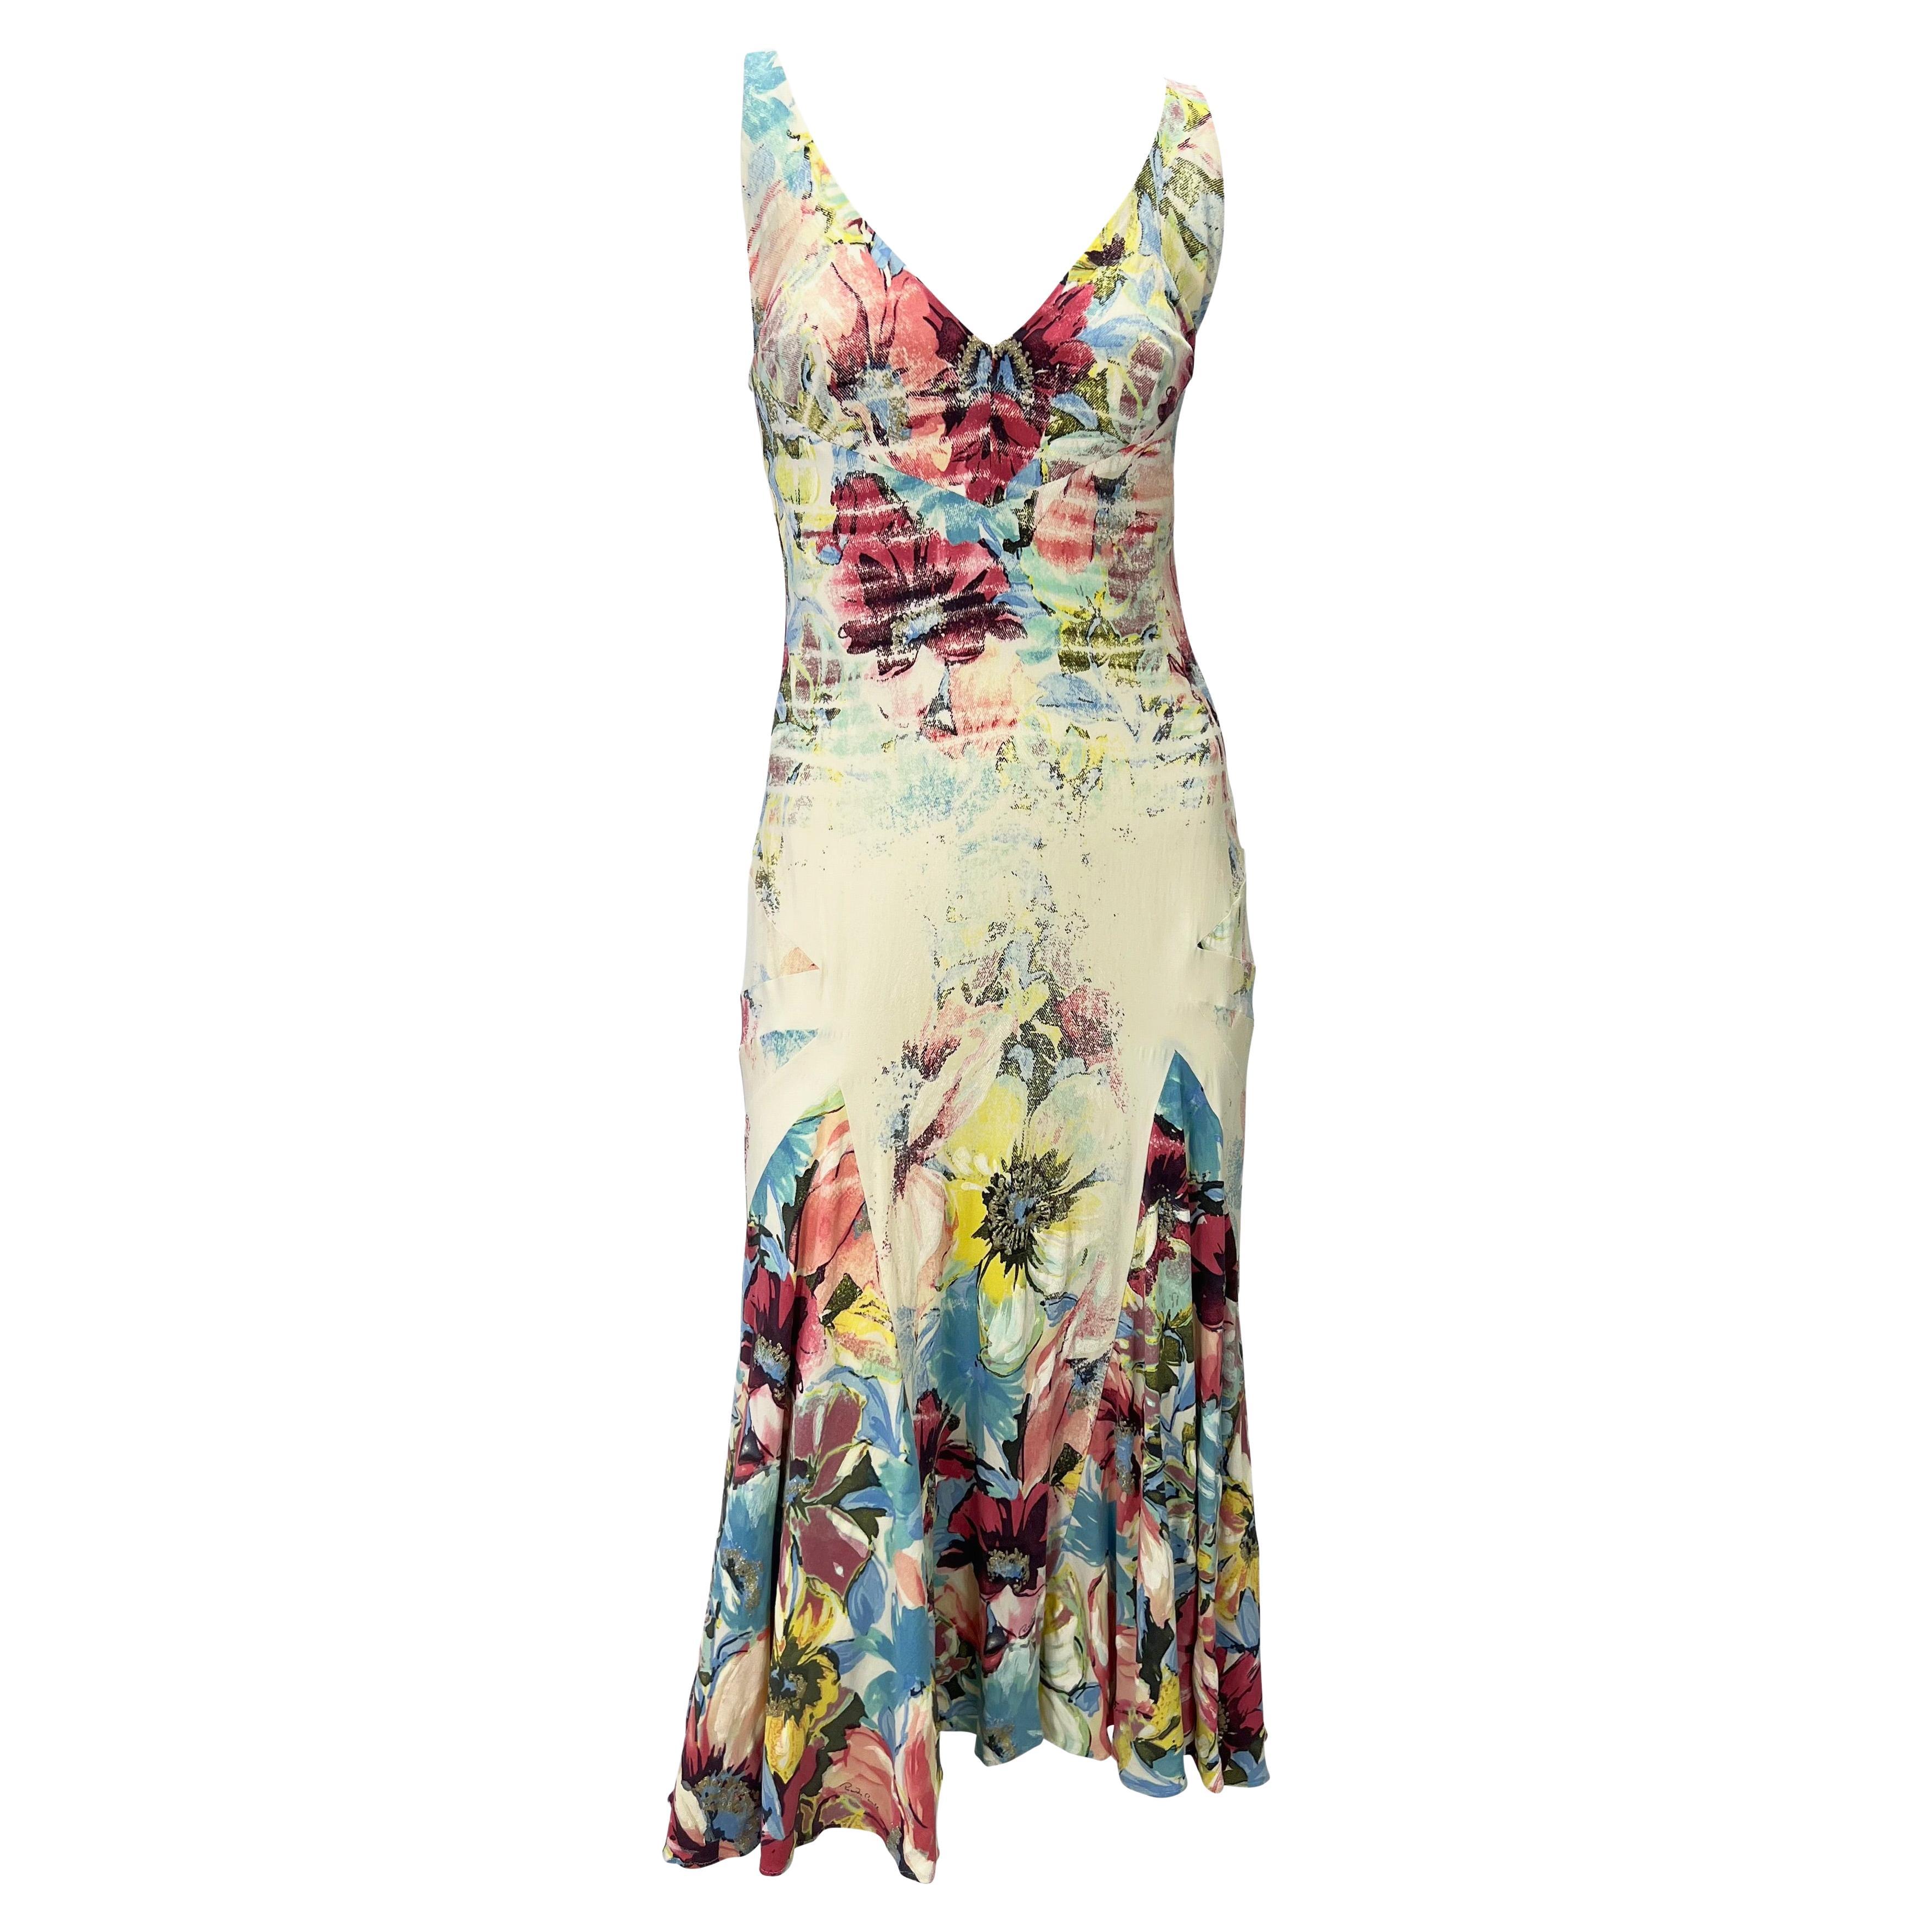 S/S 2003 Roberto Cavalli Floral Abstract Watercolor Silk Stretch Flare Dress For Sale